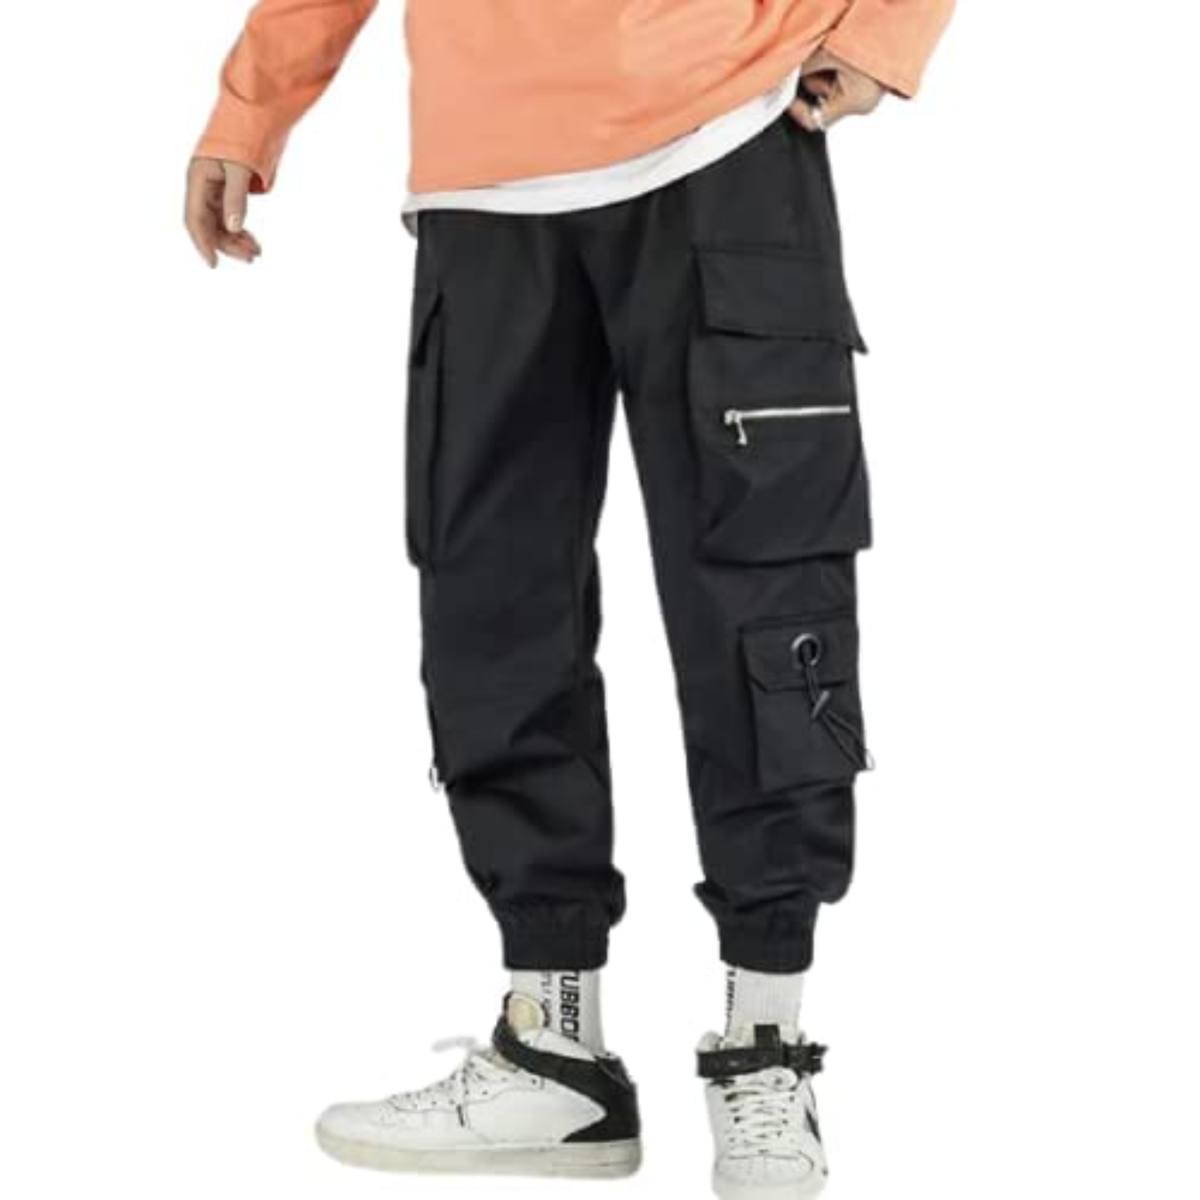 Buy Flying Machine Tapered Jogger Fit Cargo Trousers - NNNOW.com